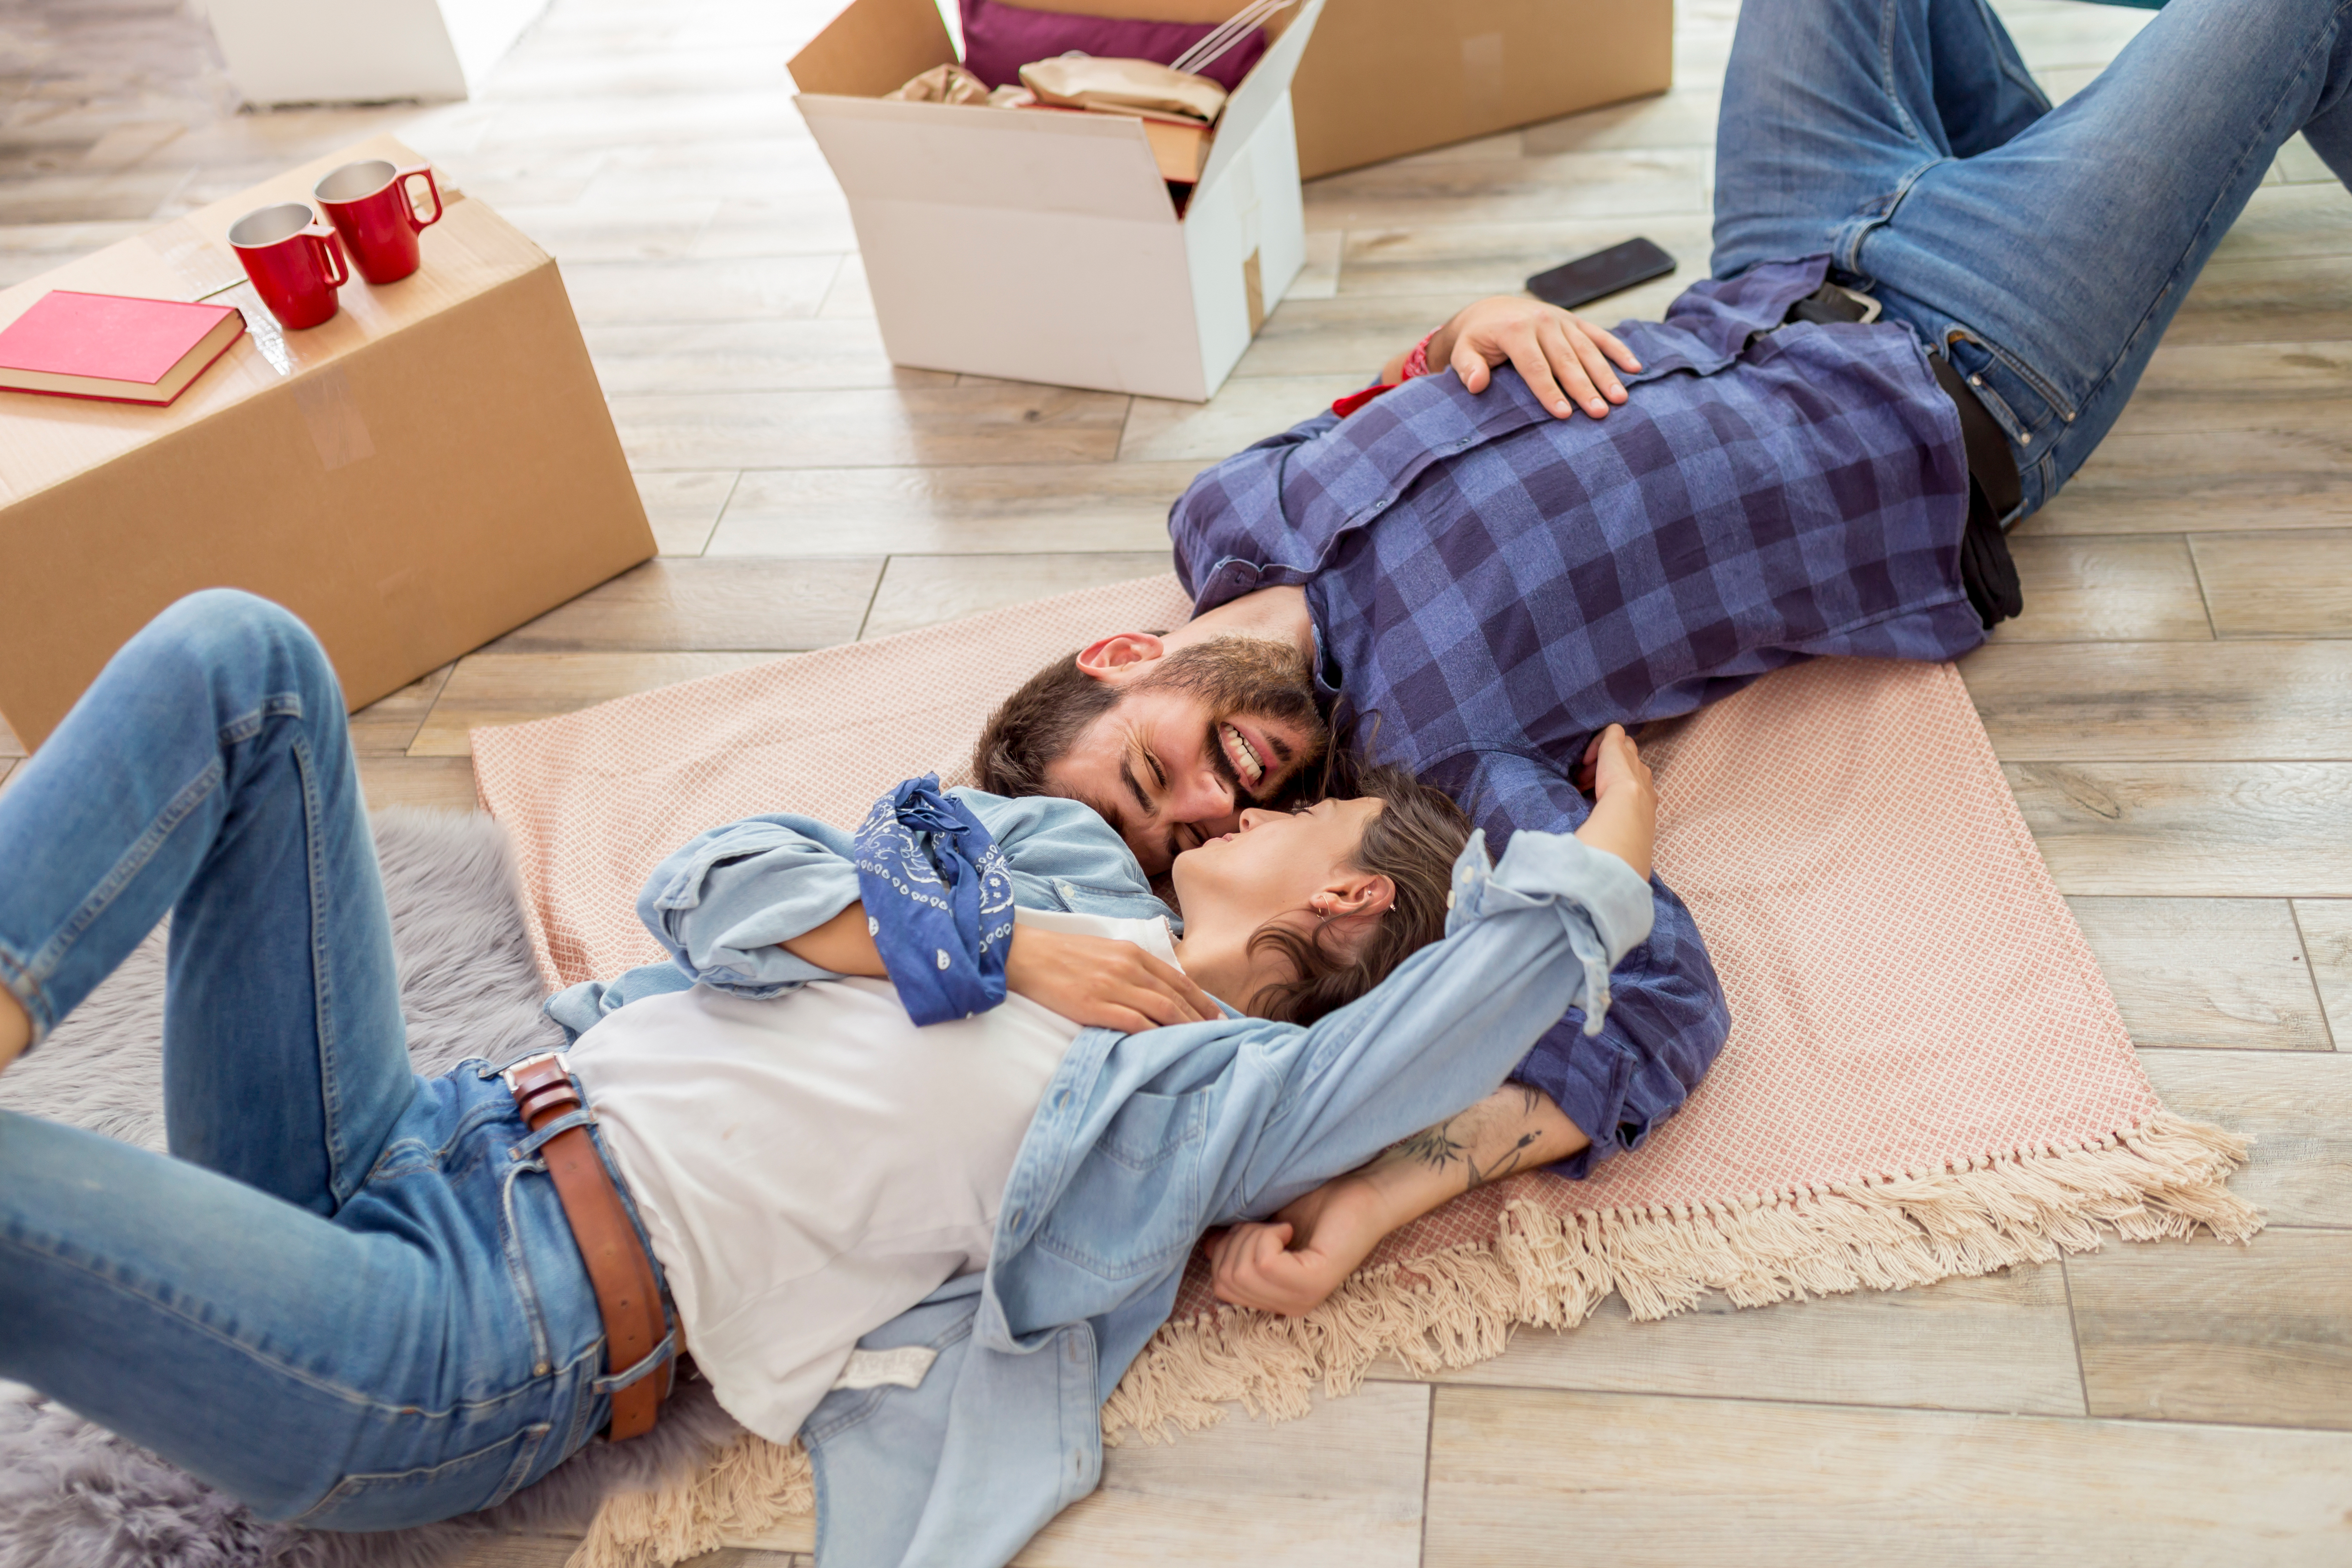 Couple laying on the floor surrounded by boxes.